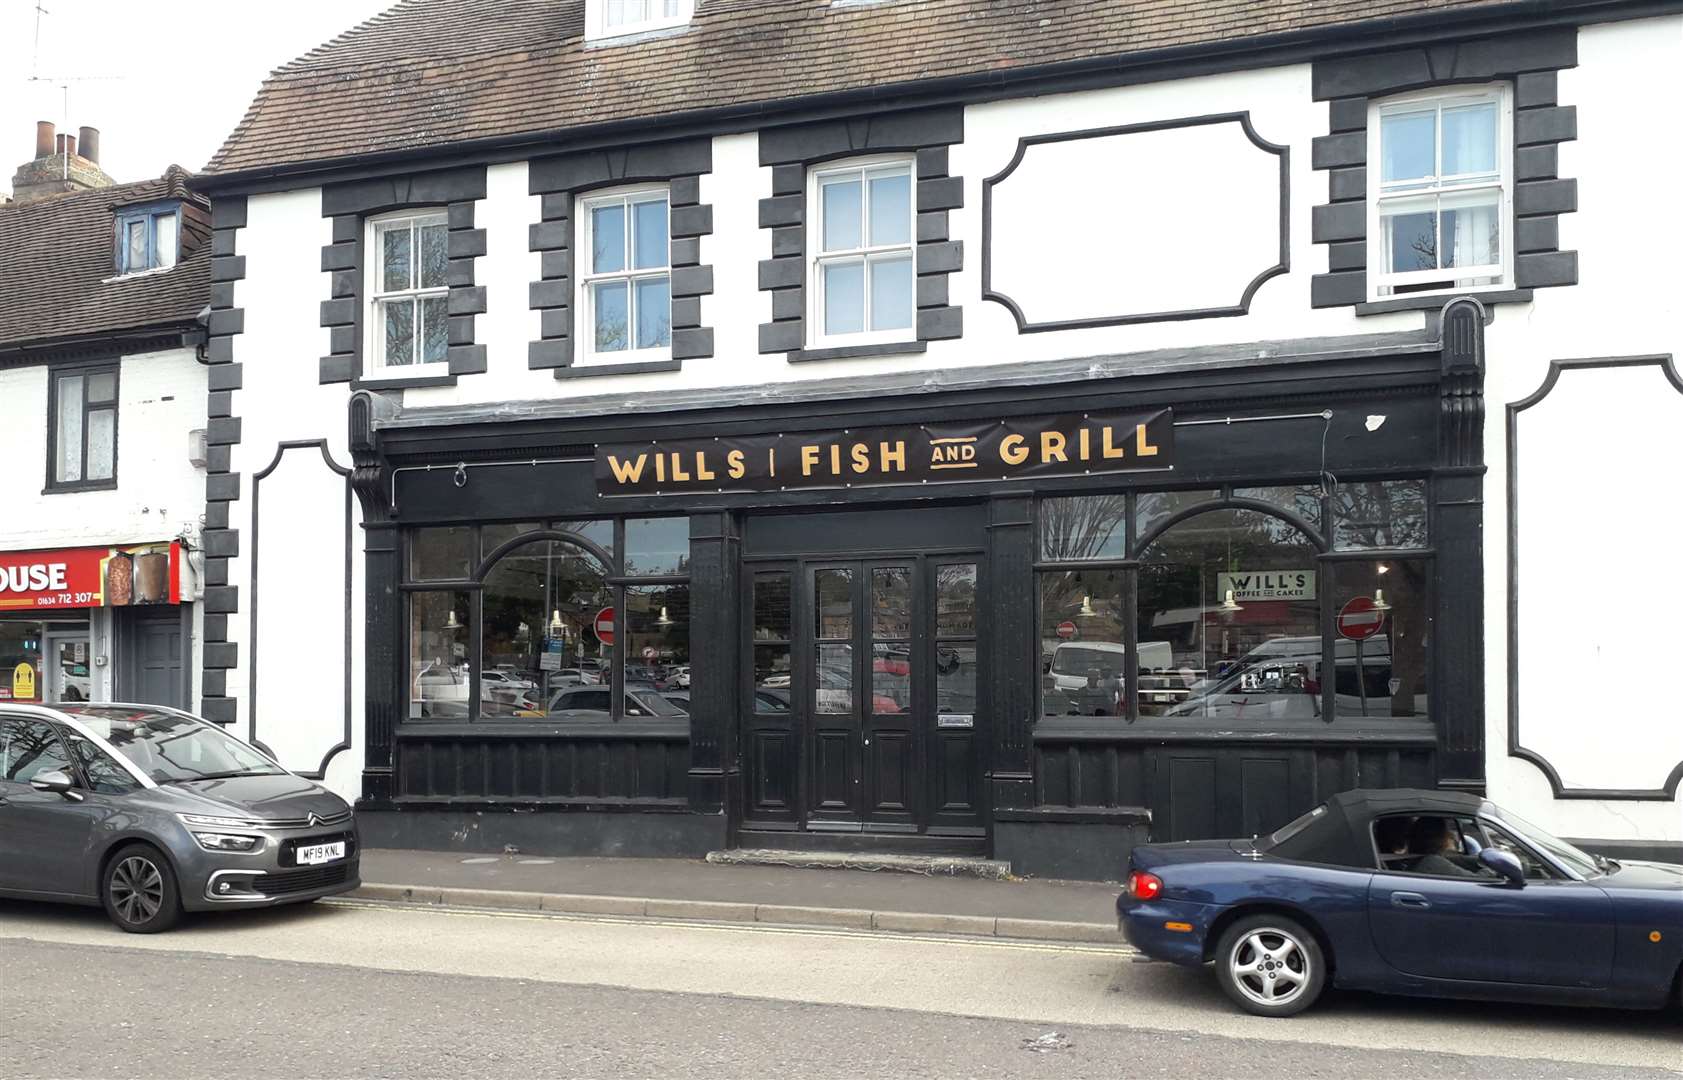 The former Three Gardeners pub is to become Wills Fish and Grill